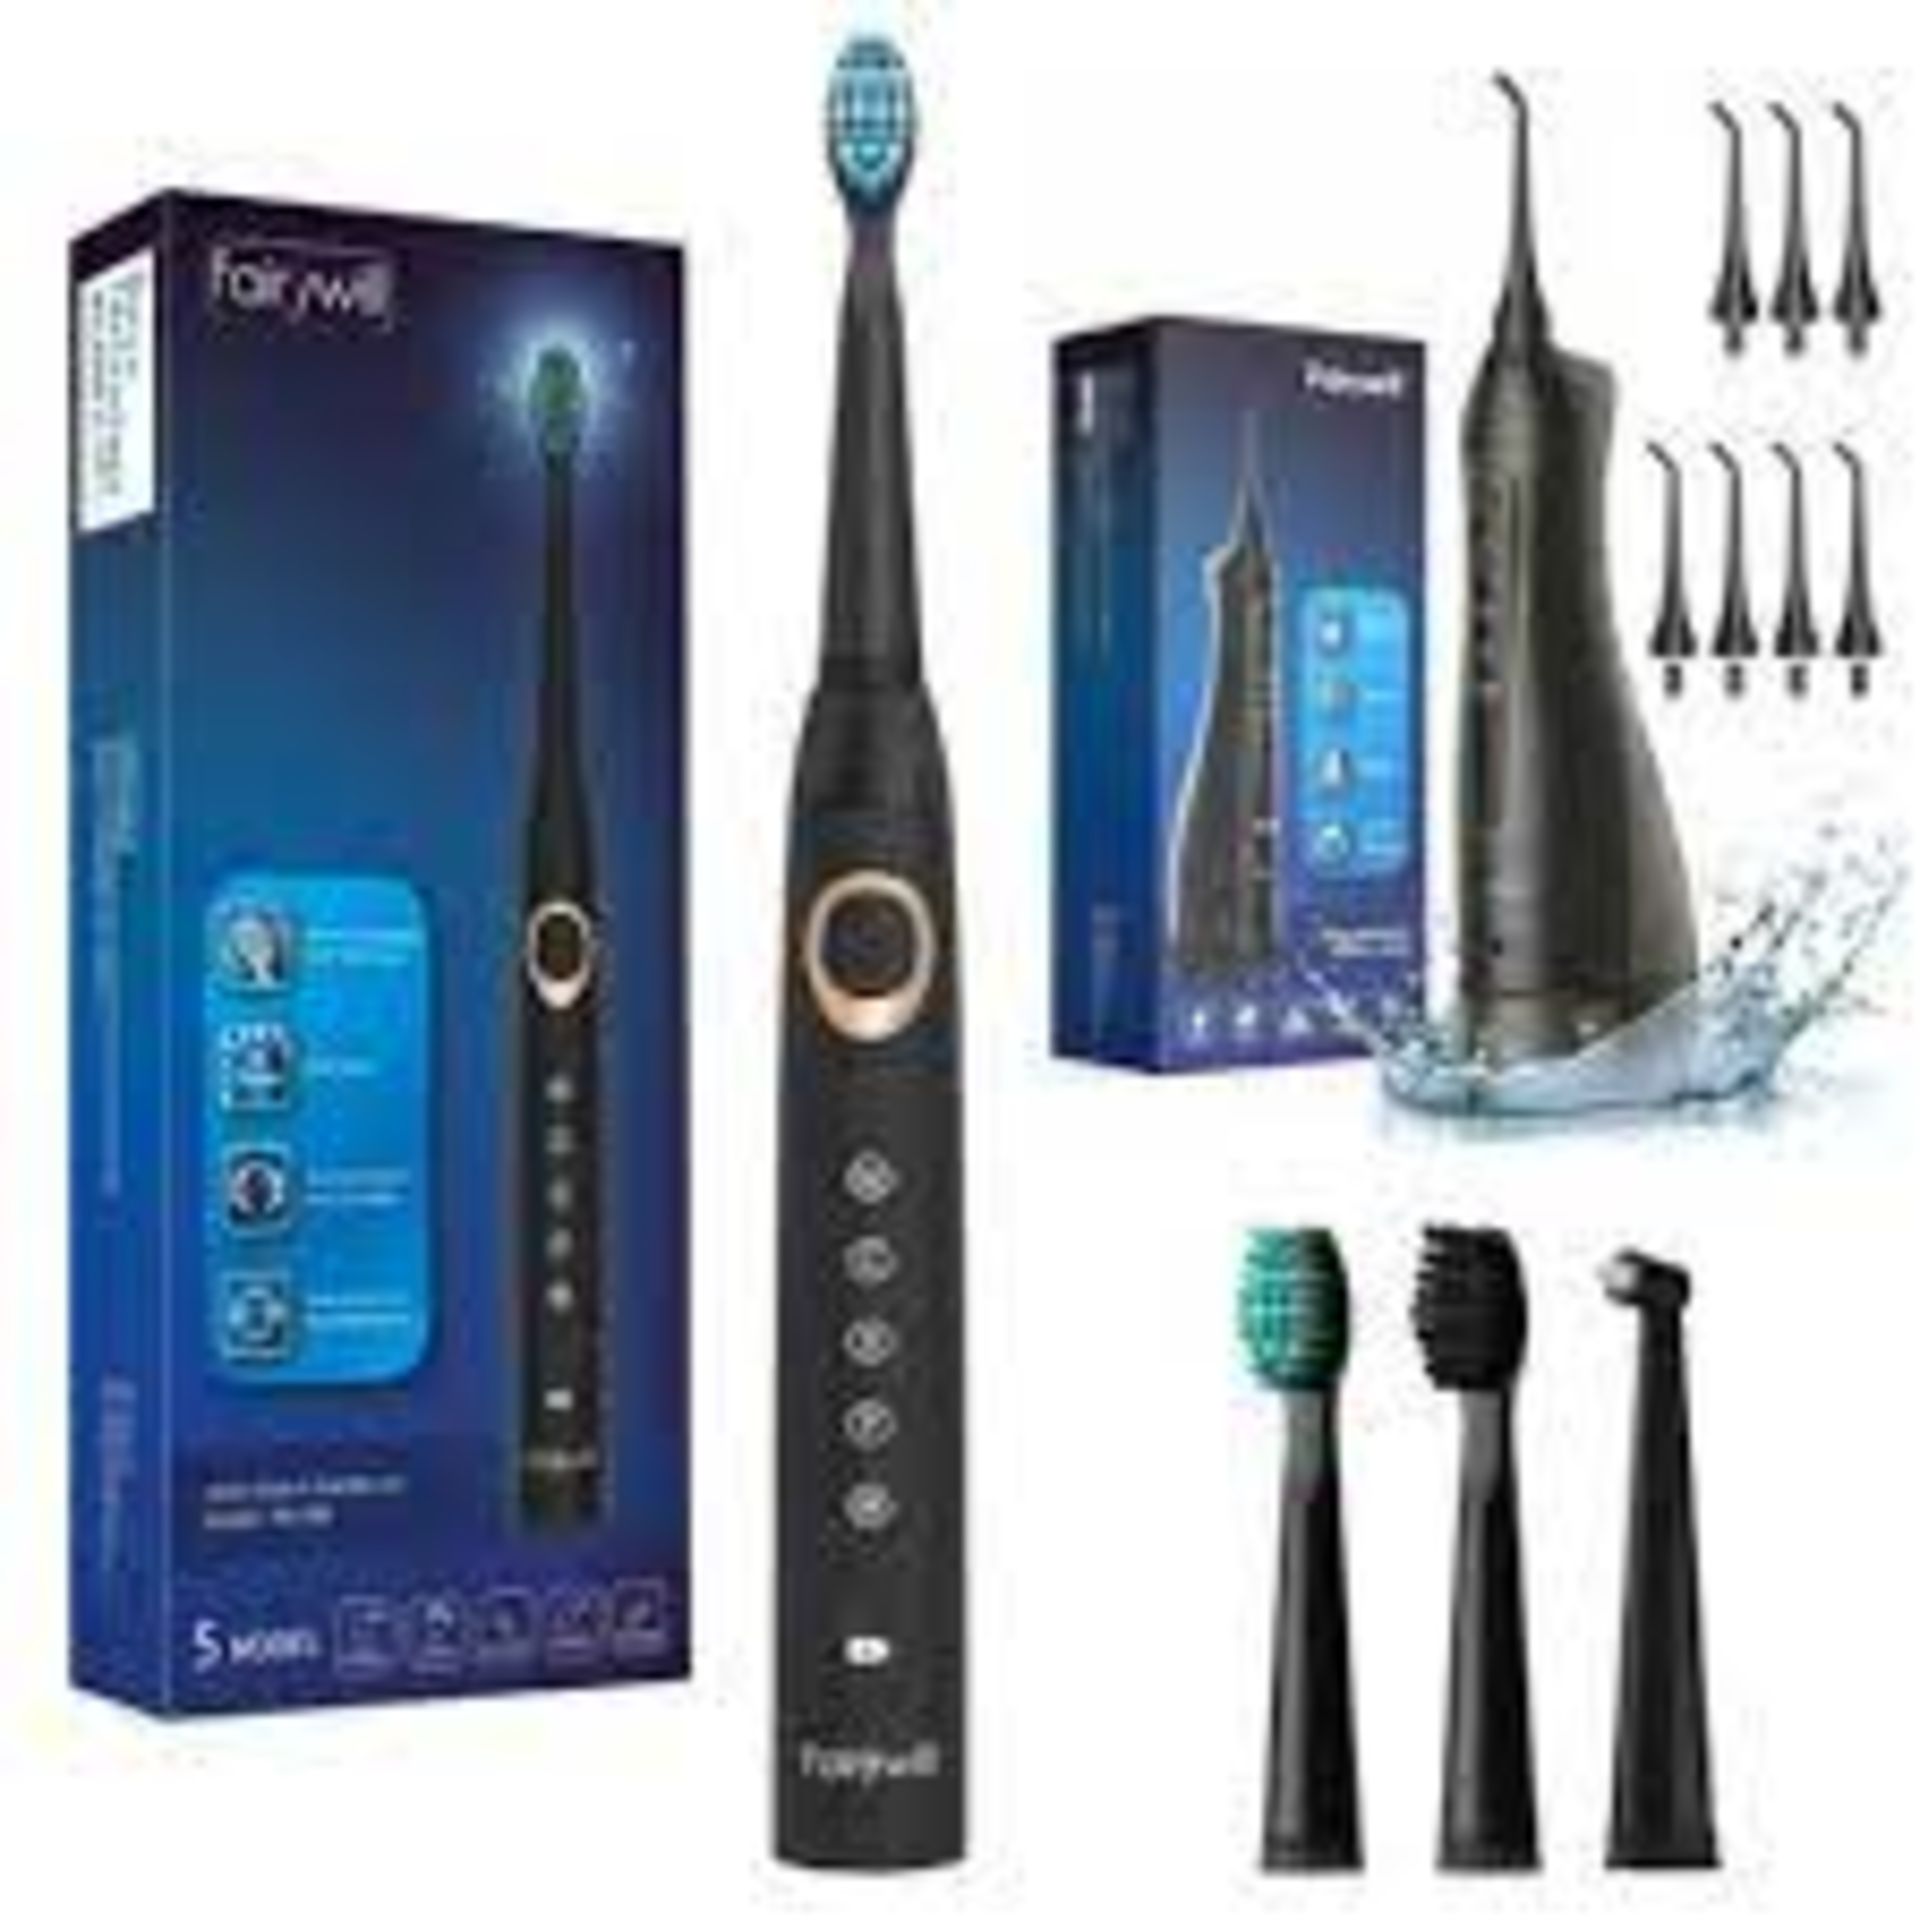 4 X BRAND NEW BOXED FAIRYWELL MODEL2011 SONIC ELECTRIC TOOTHBRUSHES. 3 PROGRAMME MODES (OFC)